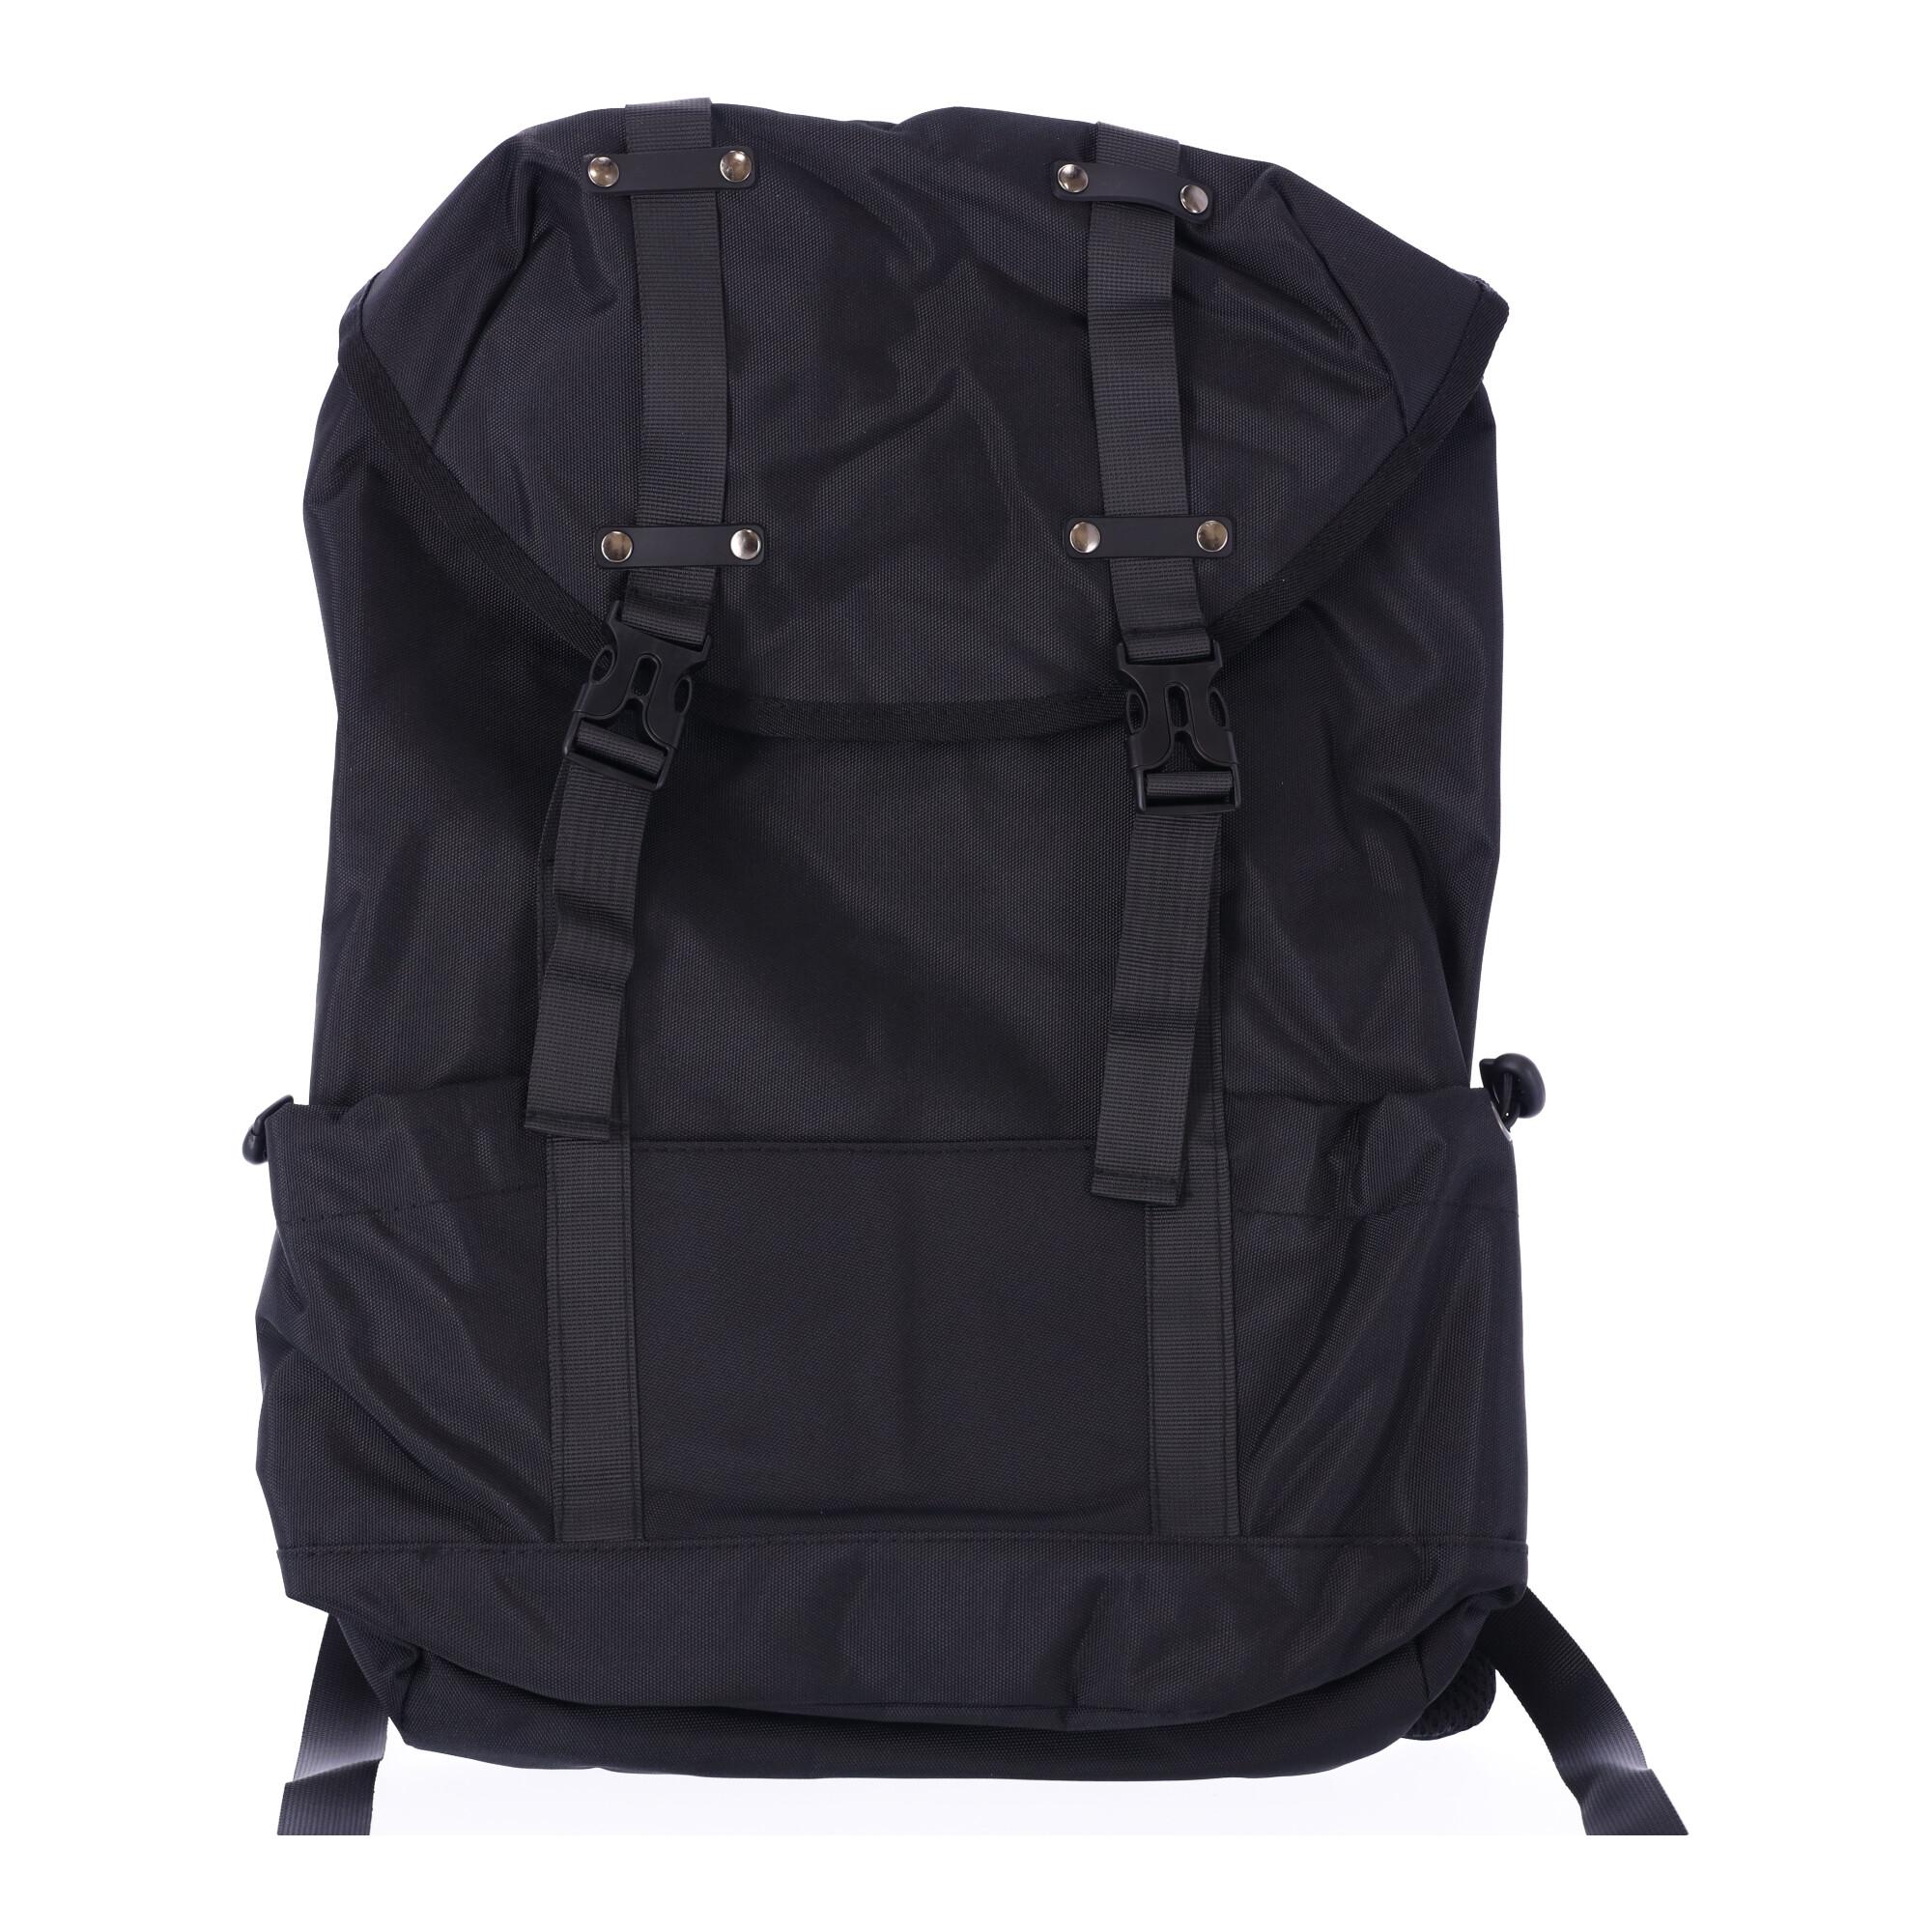 Travel backpack with space for a laptop - black